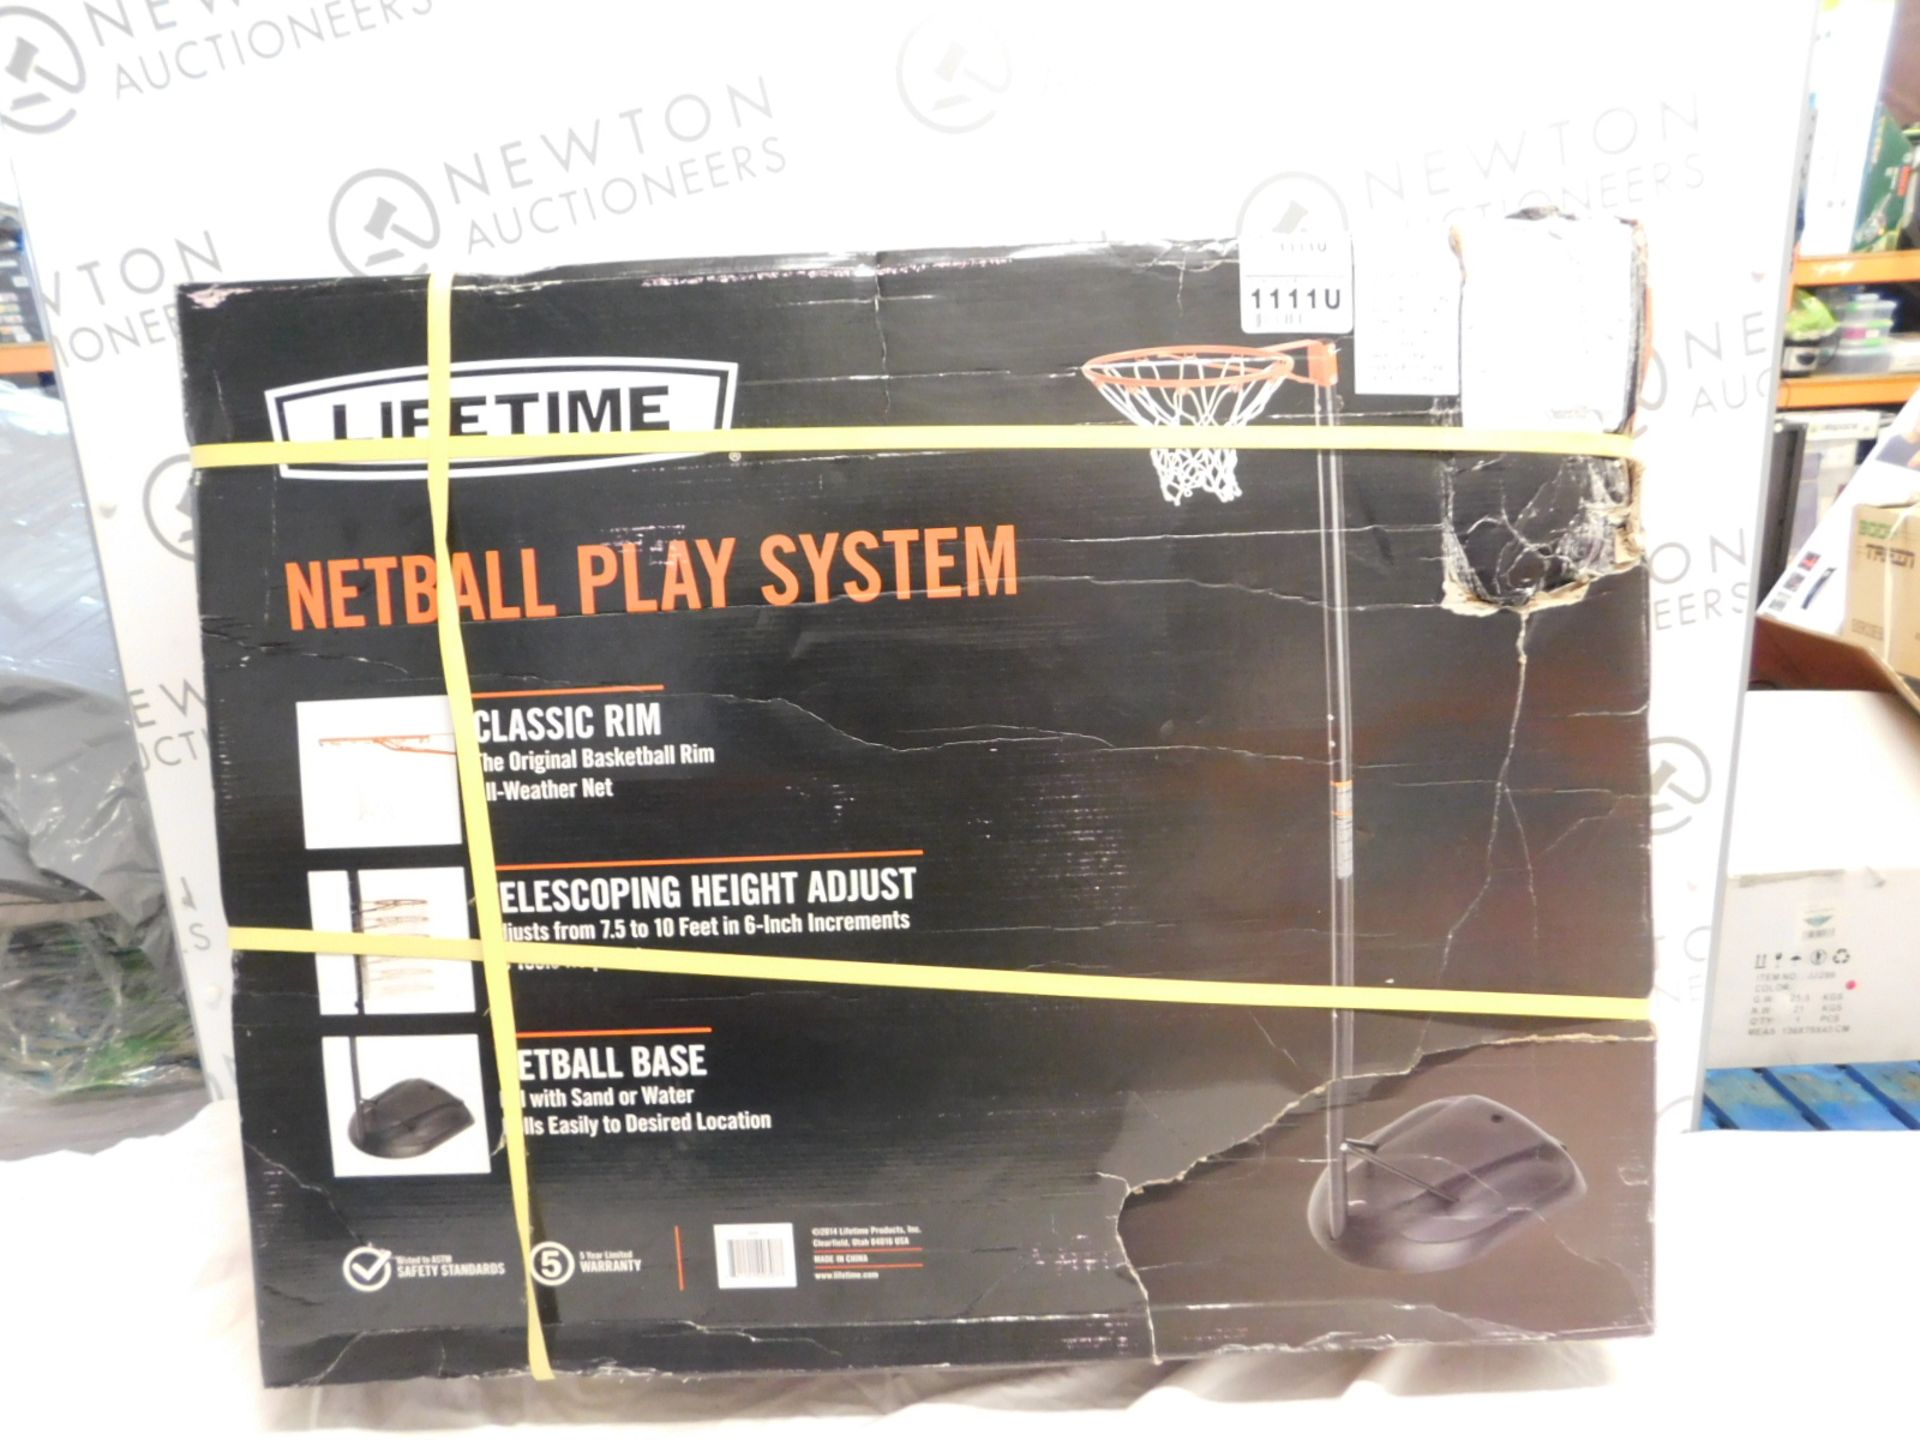 1 BOXED LIFETIME NETBALL PLAY SYSTEM RRP £94.99